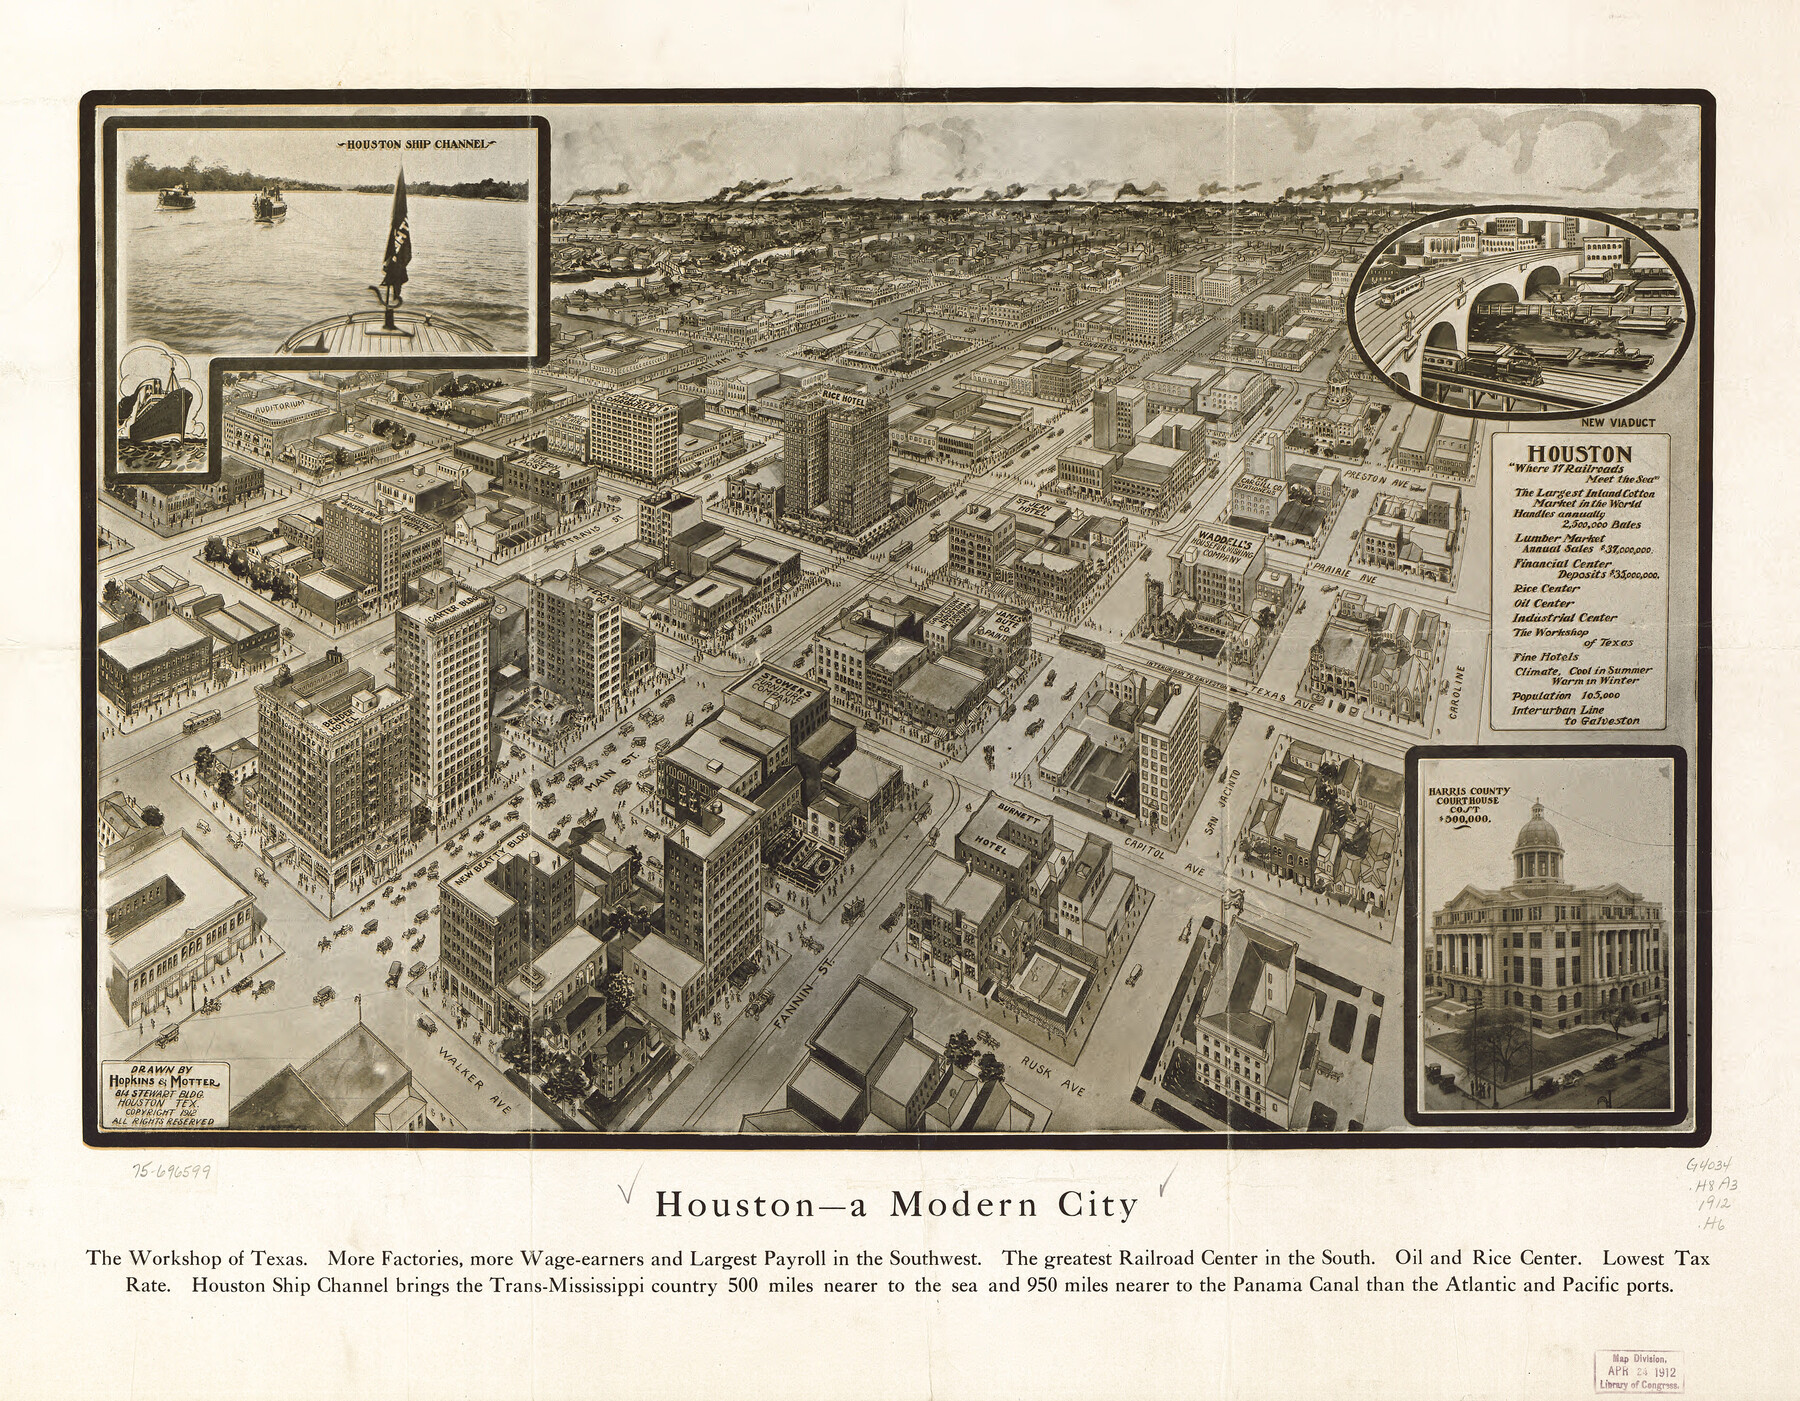 93482, Houston - a Modern City, Library of Congress